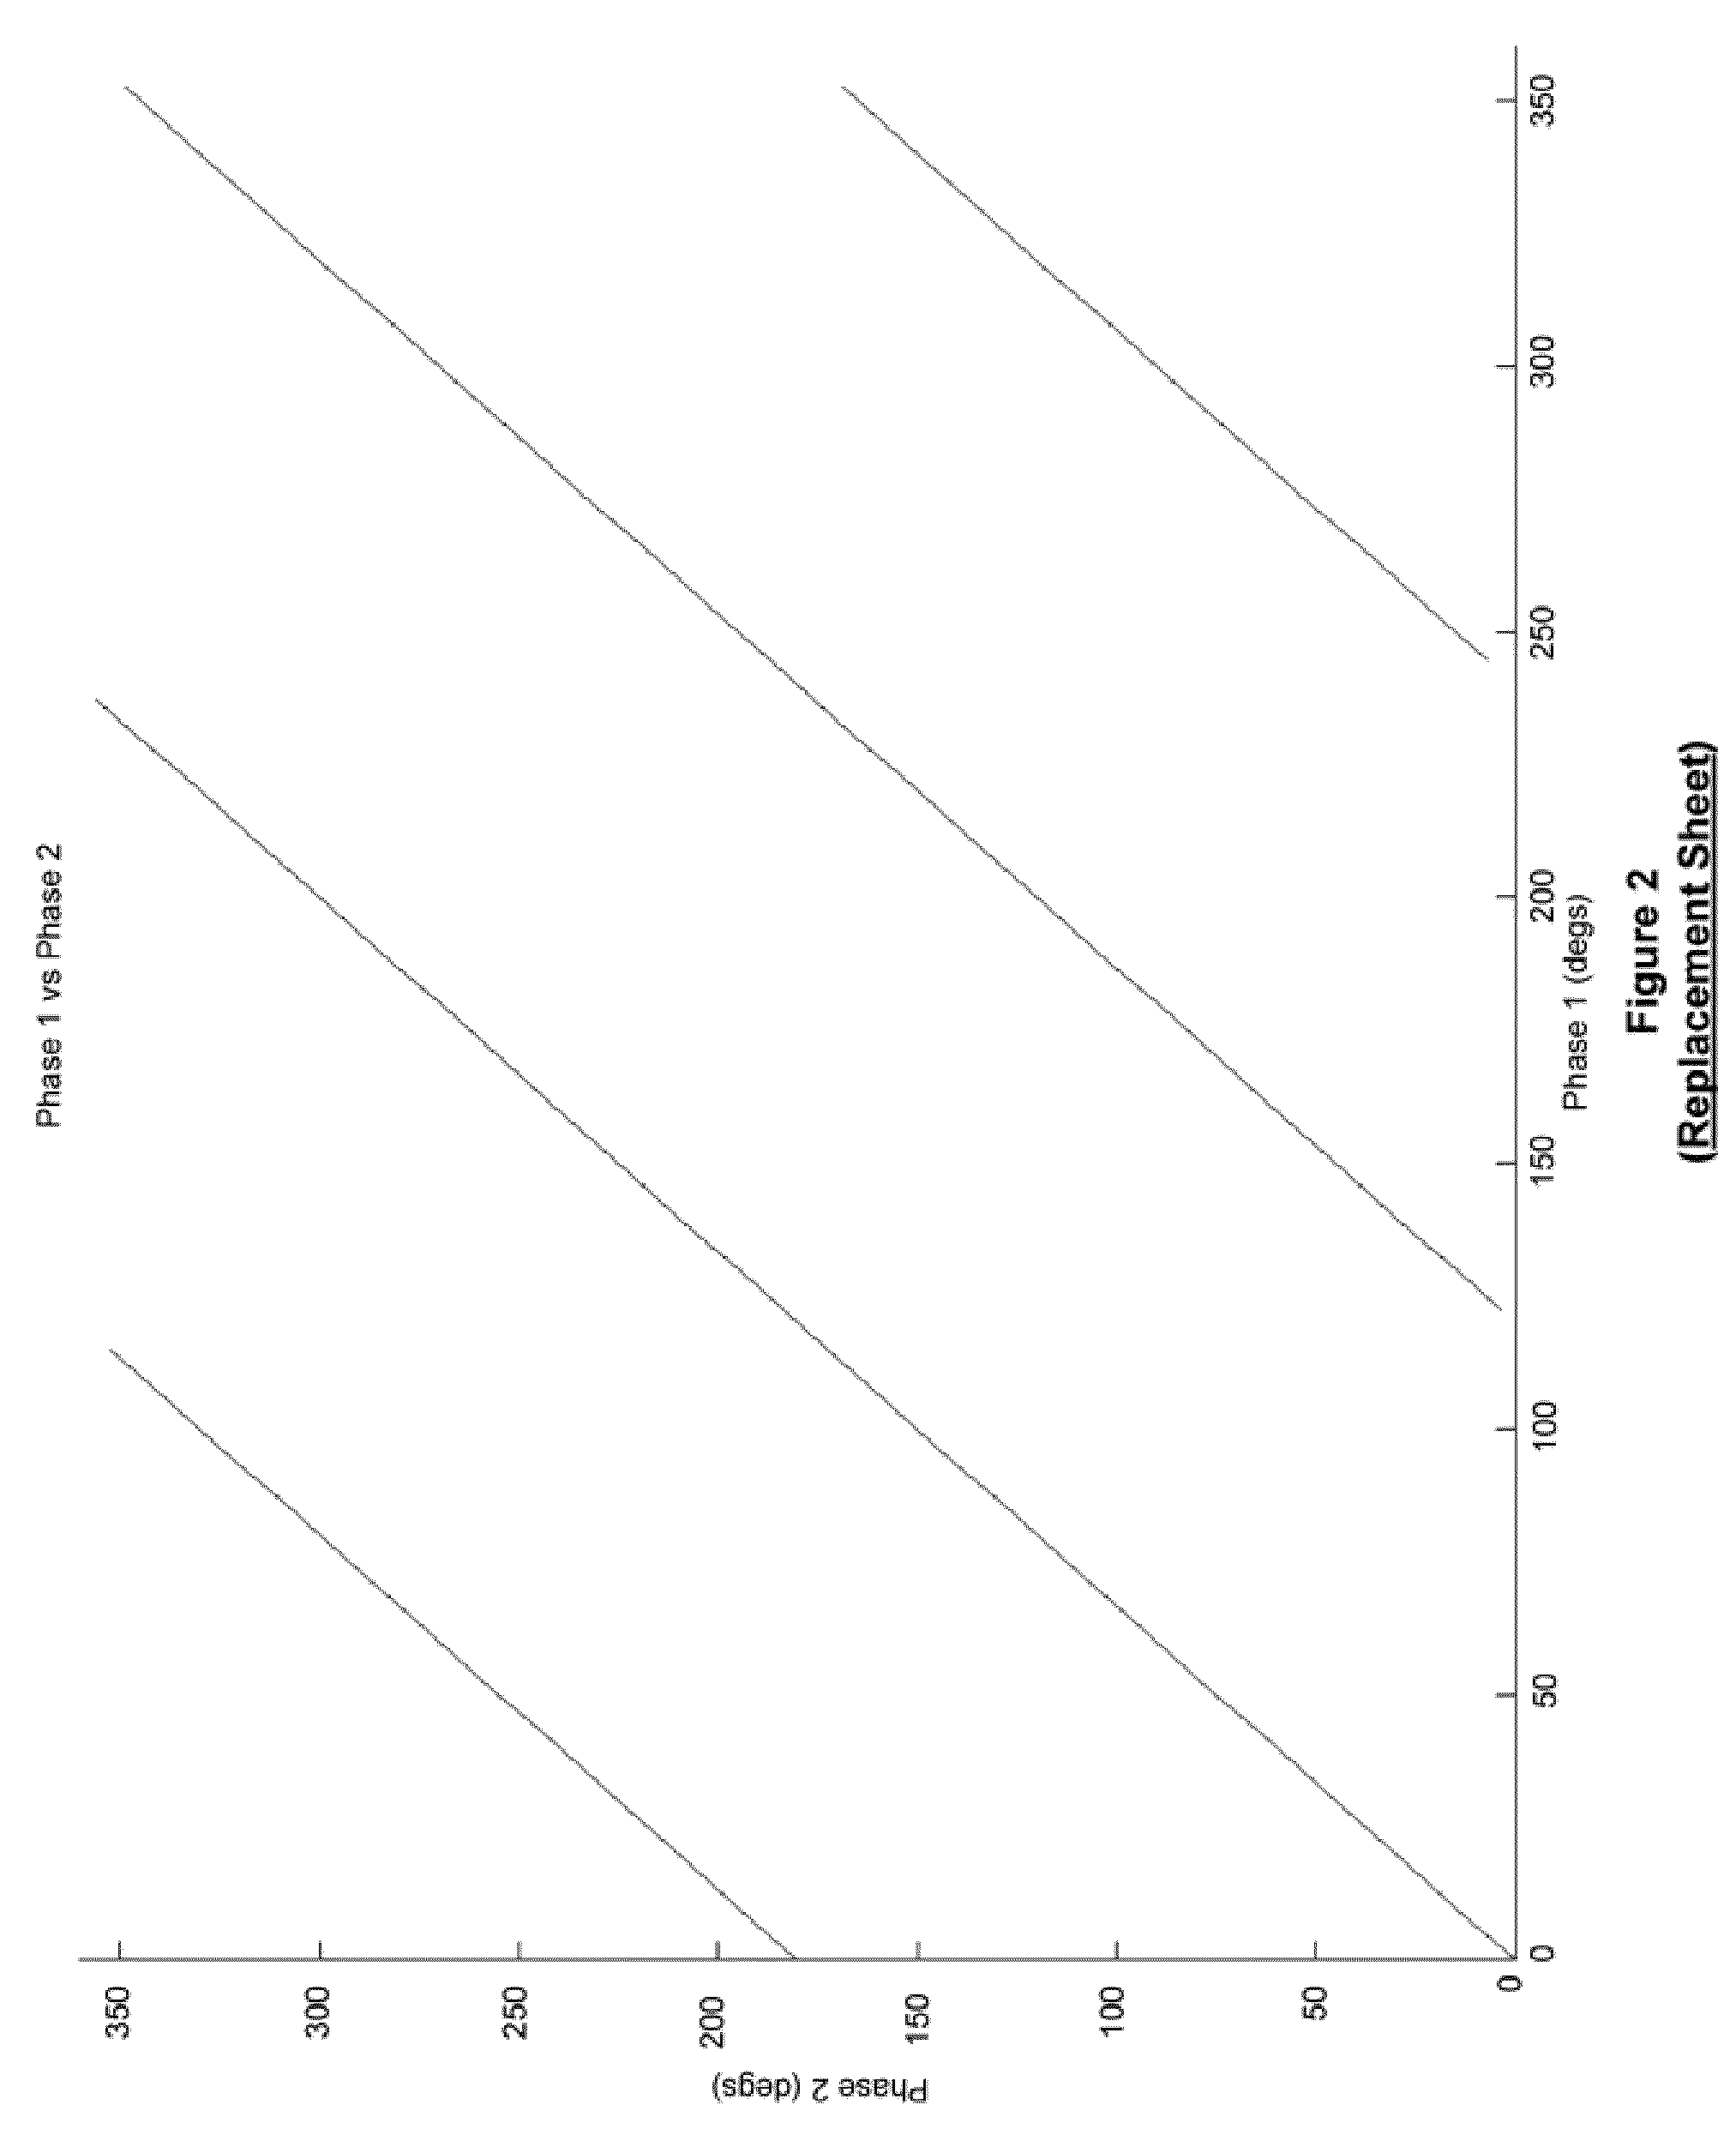 Advanced ultrasonic interferometer and method of non-linear classification and identification of matter using same